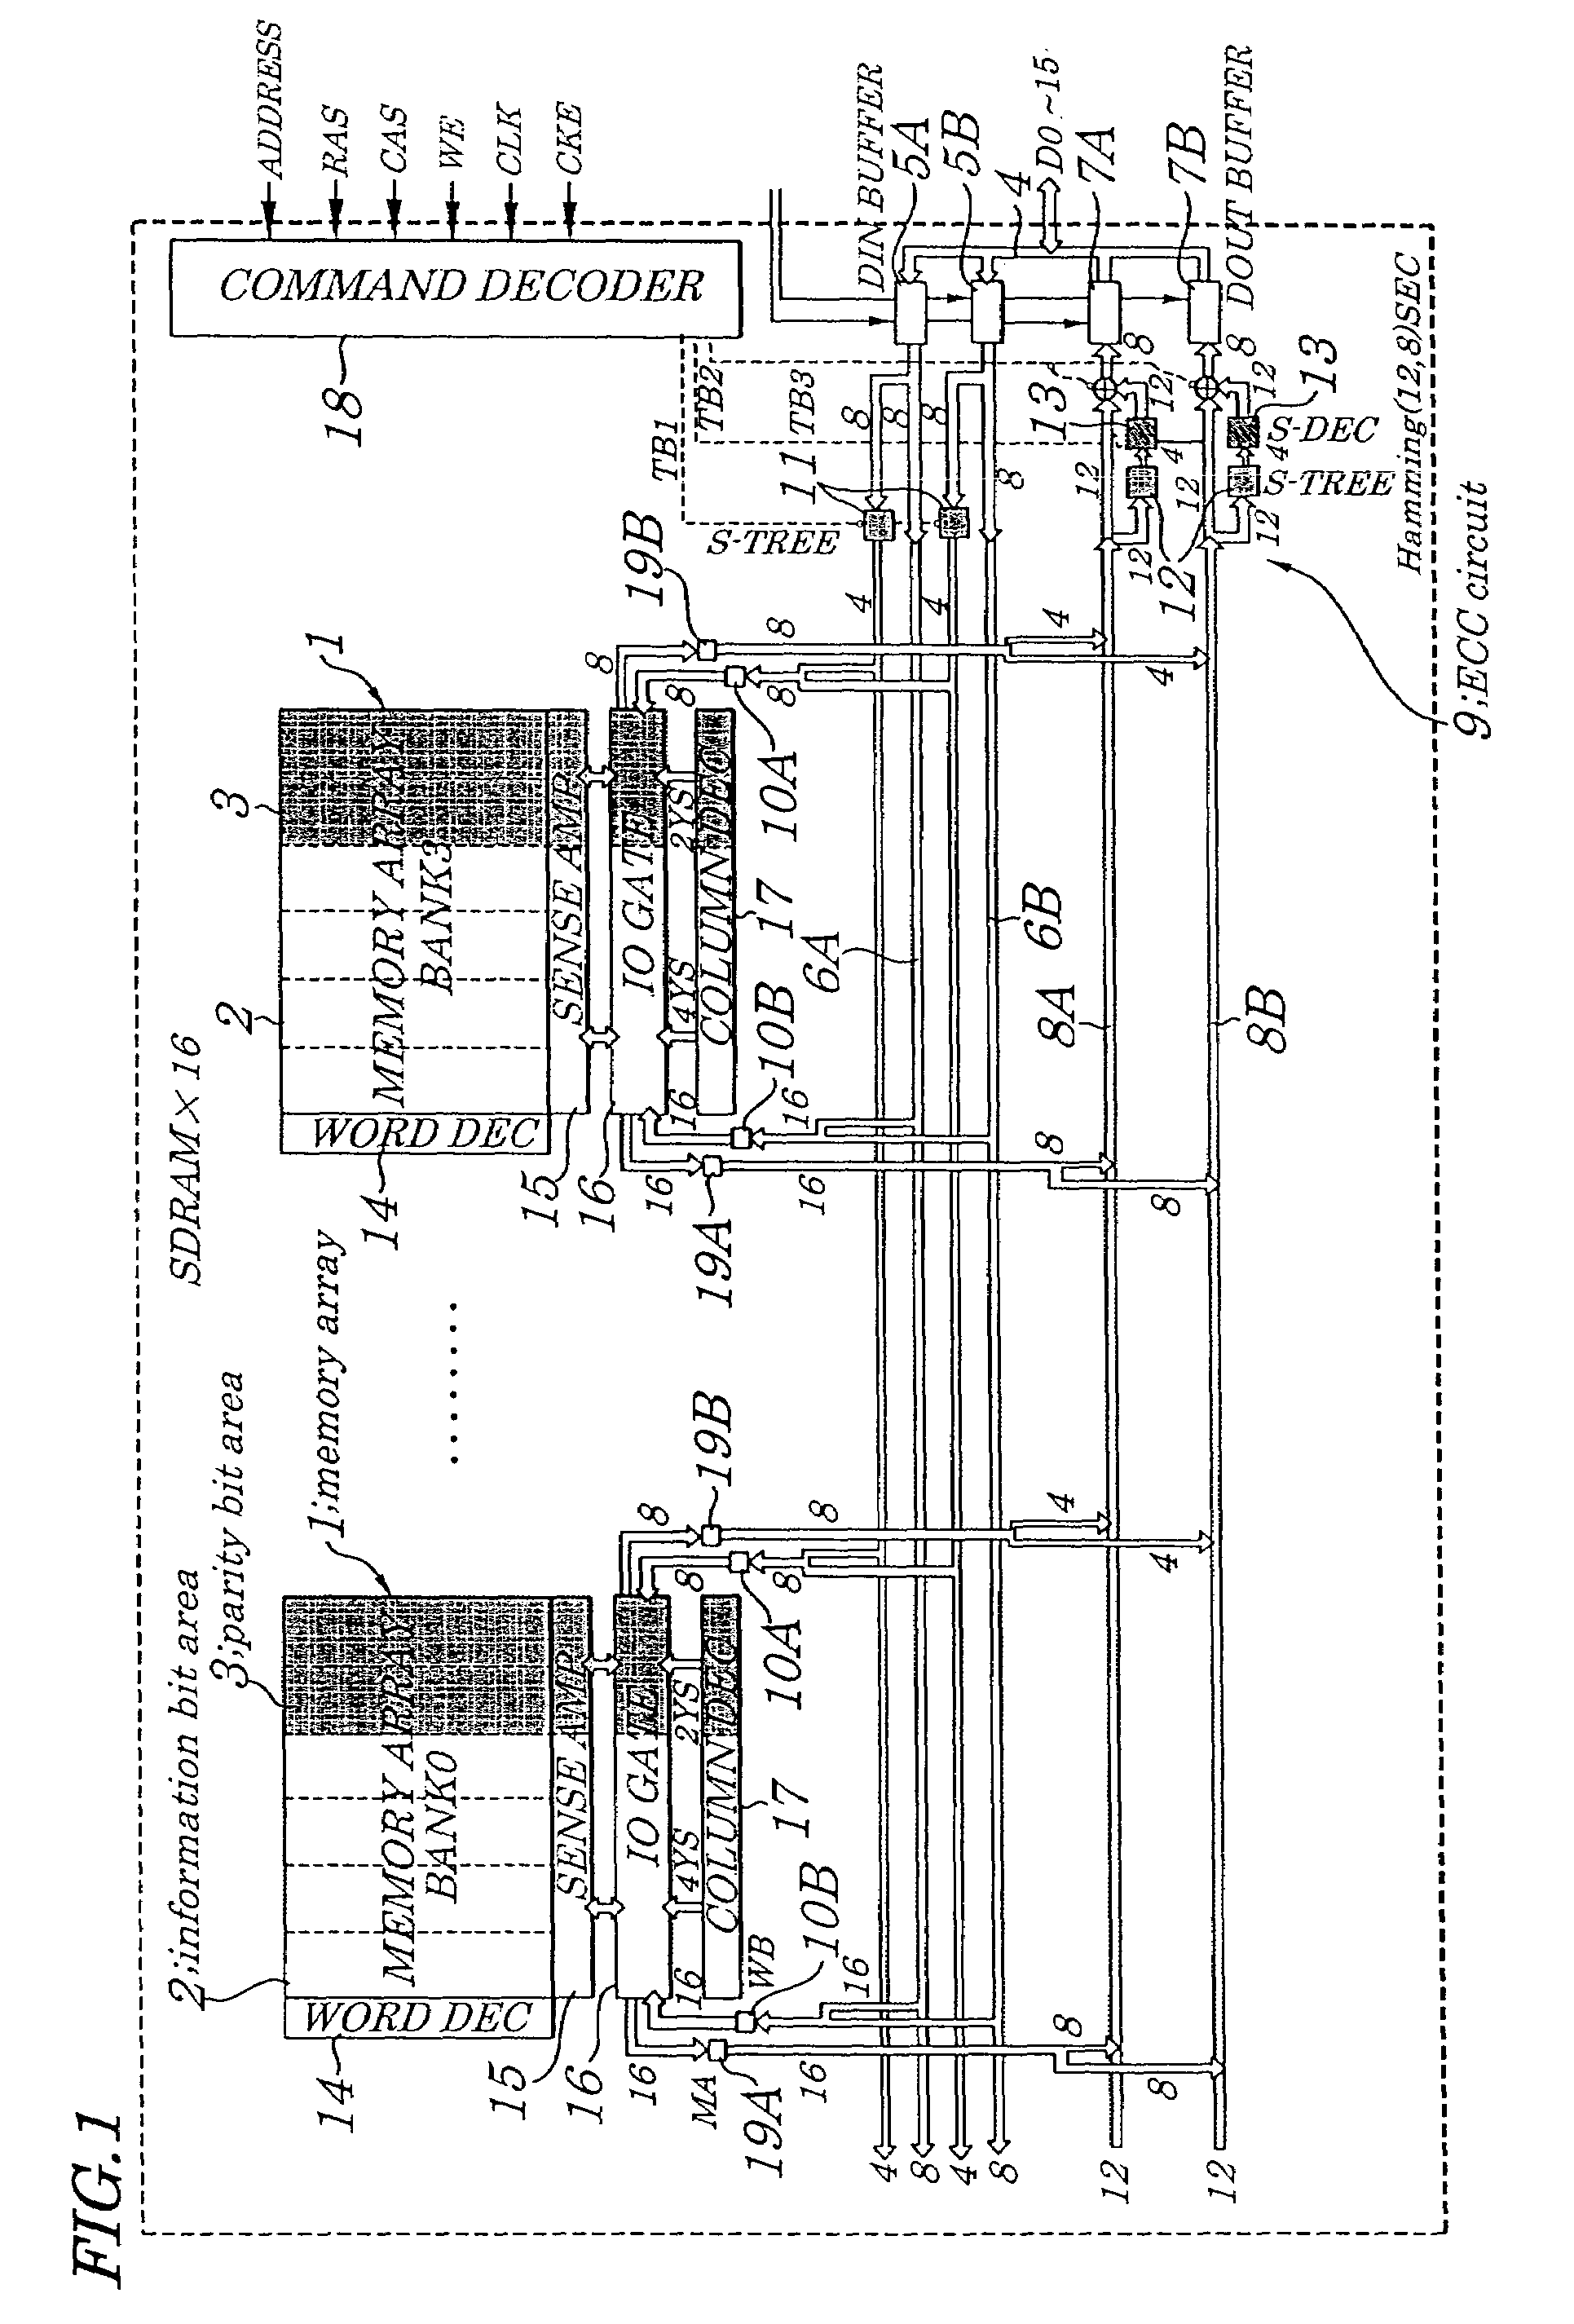 Semiconductor memory device provided with error correcting code circuitry